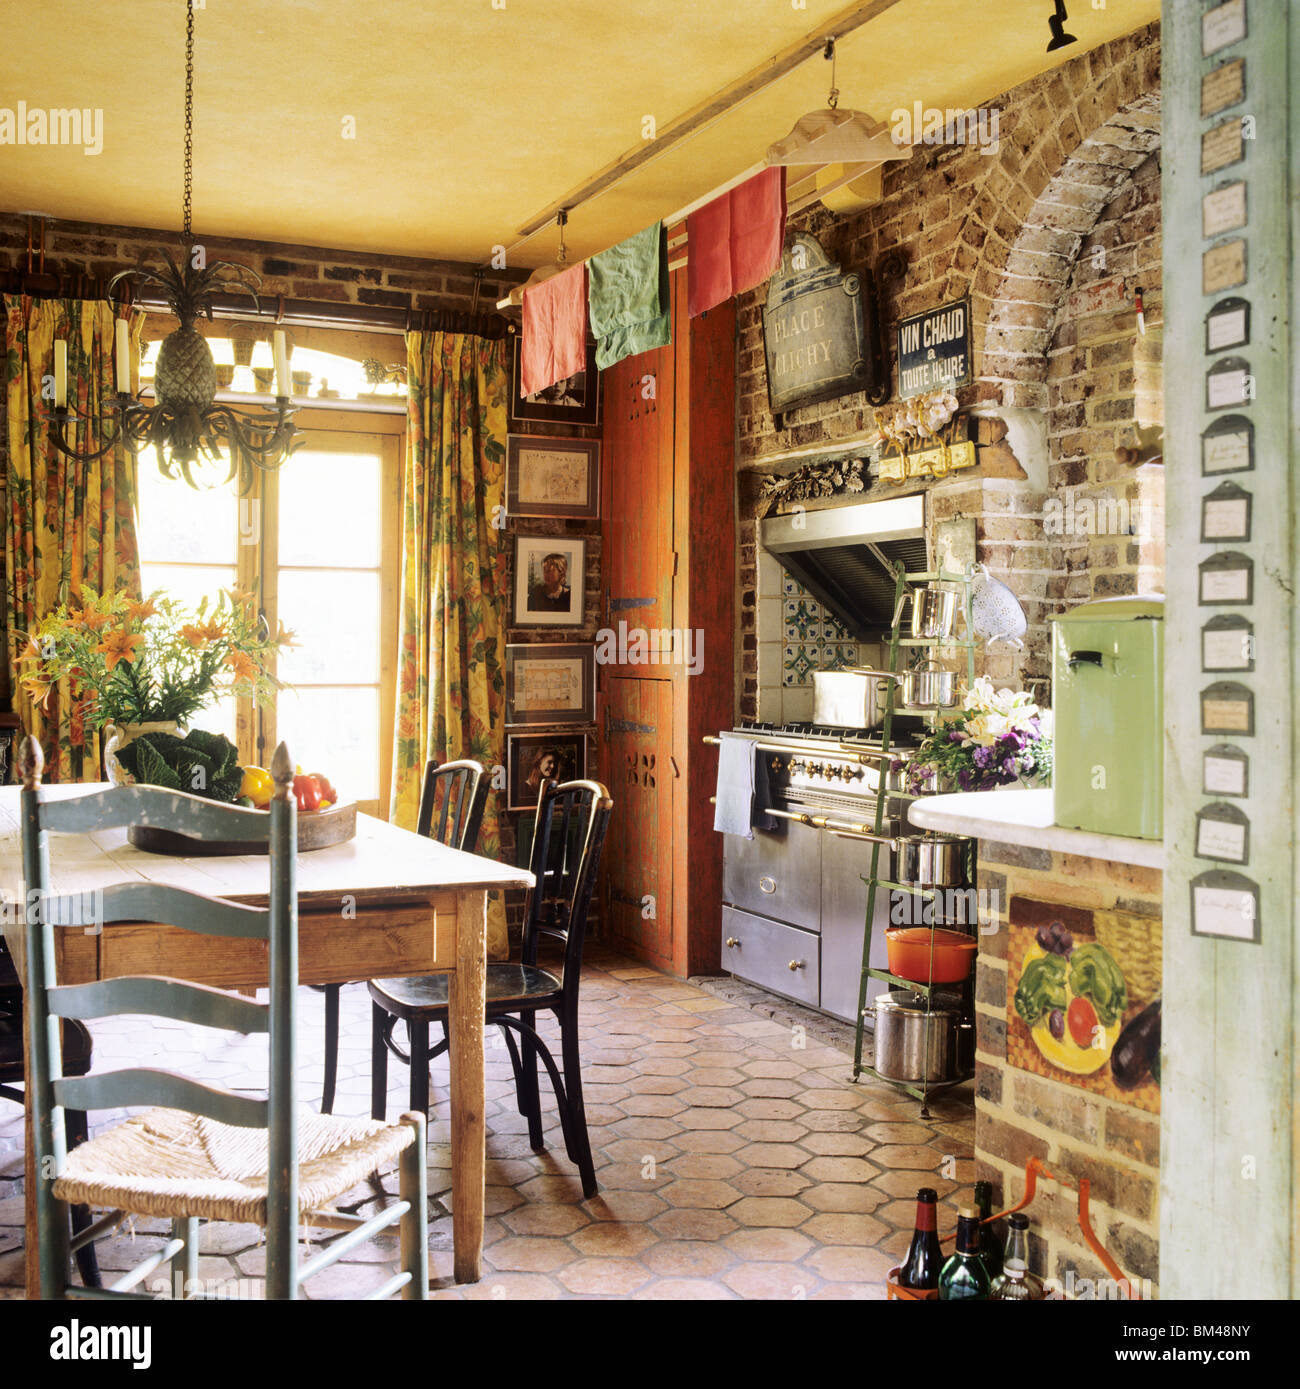 country-kitchen-with-hexagonal-floor-tiles-and-exposed-brick-in-converted-BM48NY.jpg